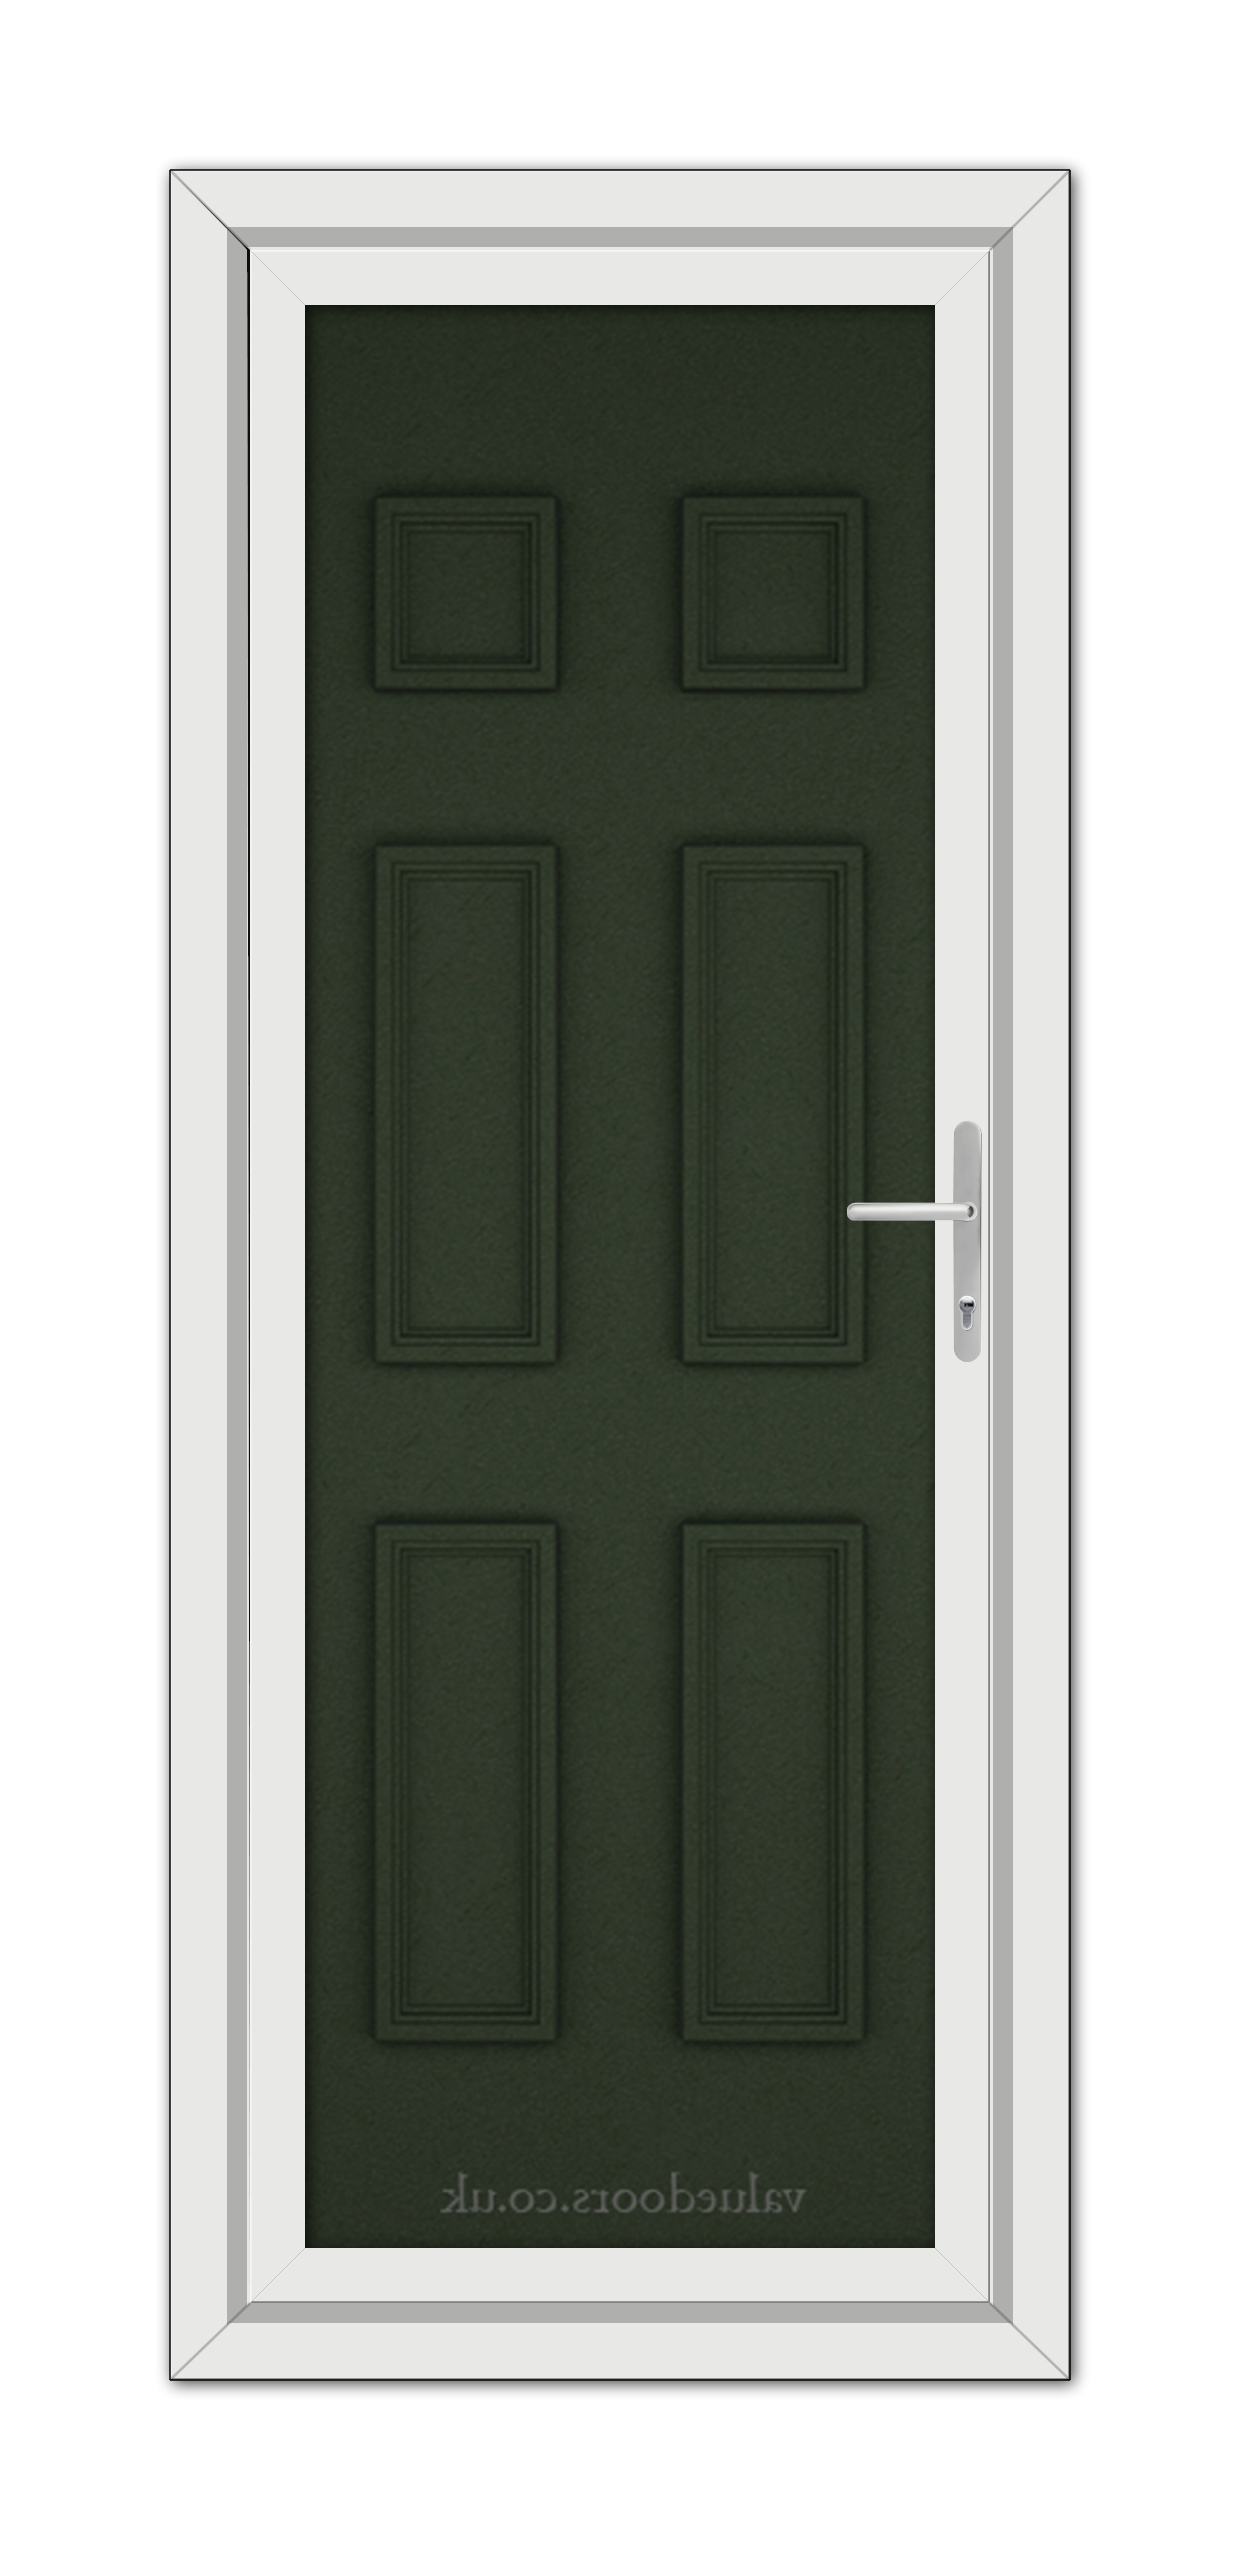 A vertical image of a closed, Green Windsor Solid uPVC Door with six panels, featuring a silver handle on the right side, set within a white door frame.